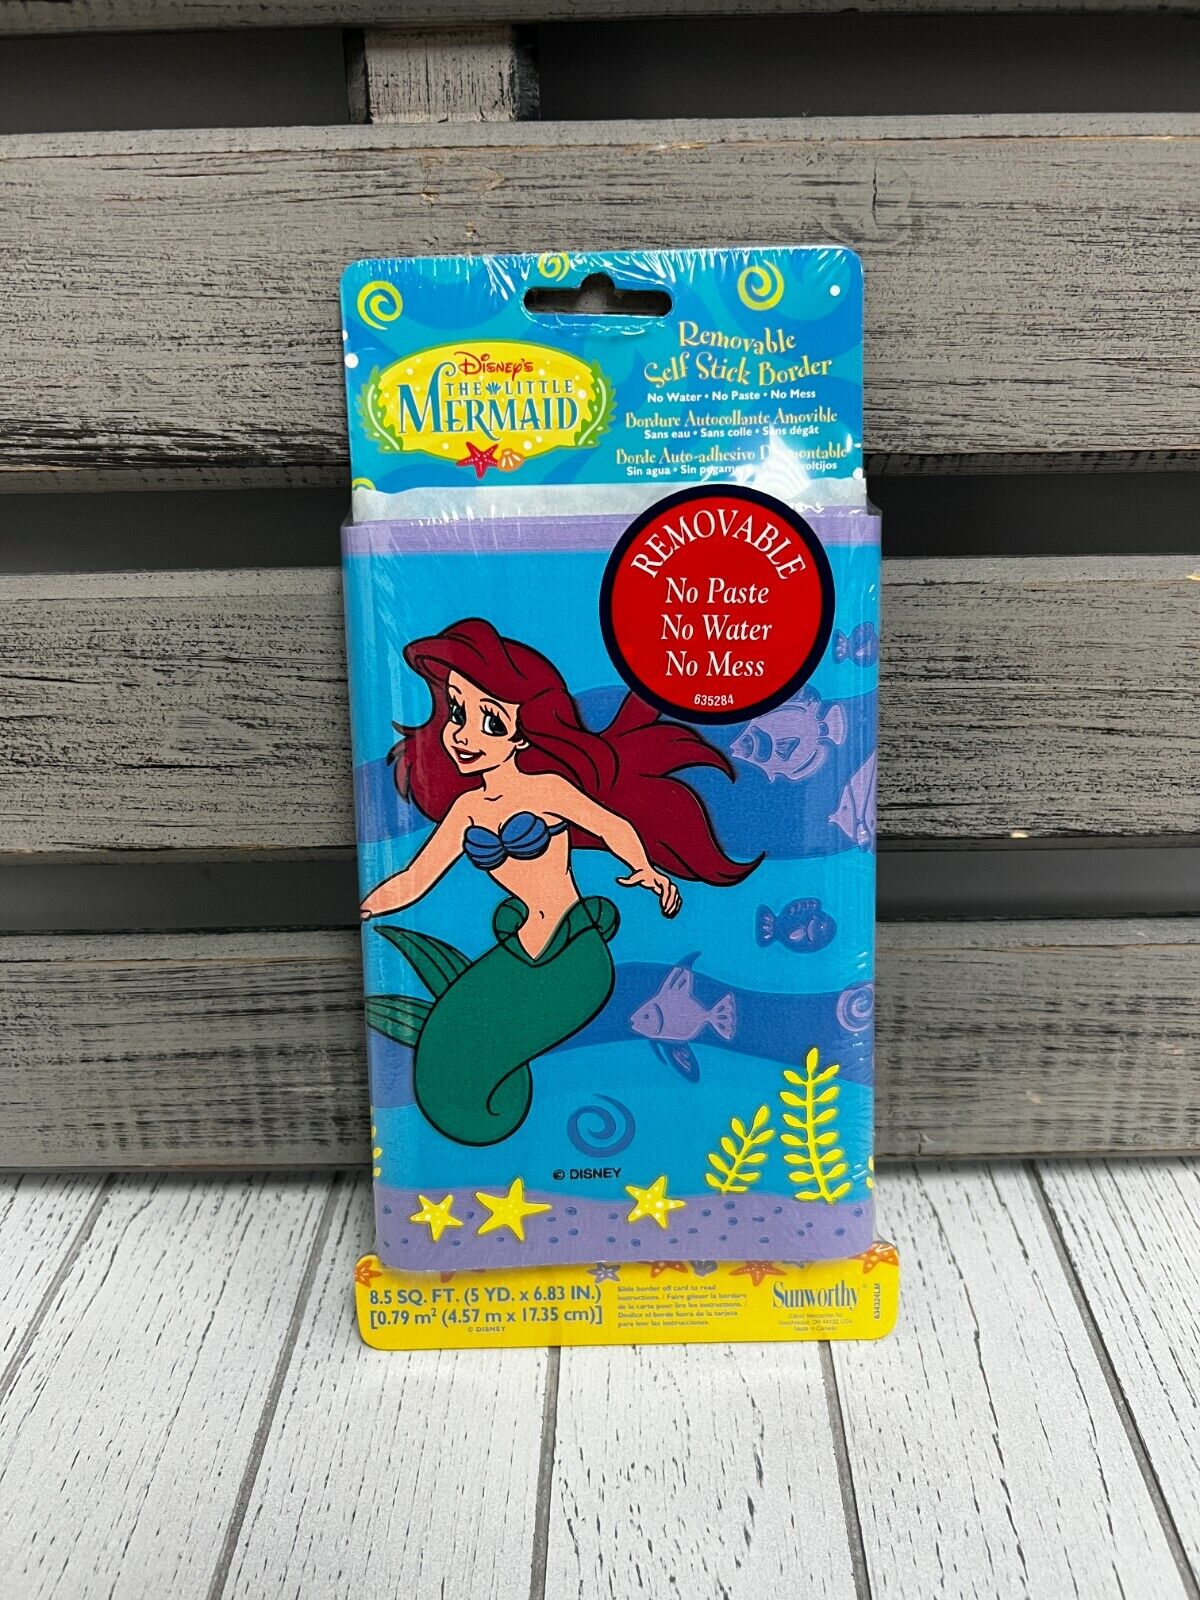 Disney's - The Little Mermaid Removable Self Stick Border 5yd X 6.83in